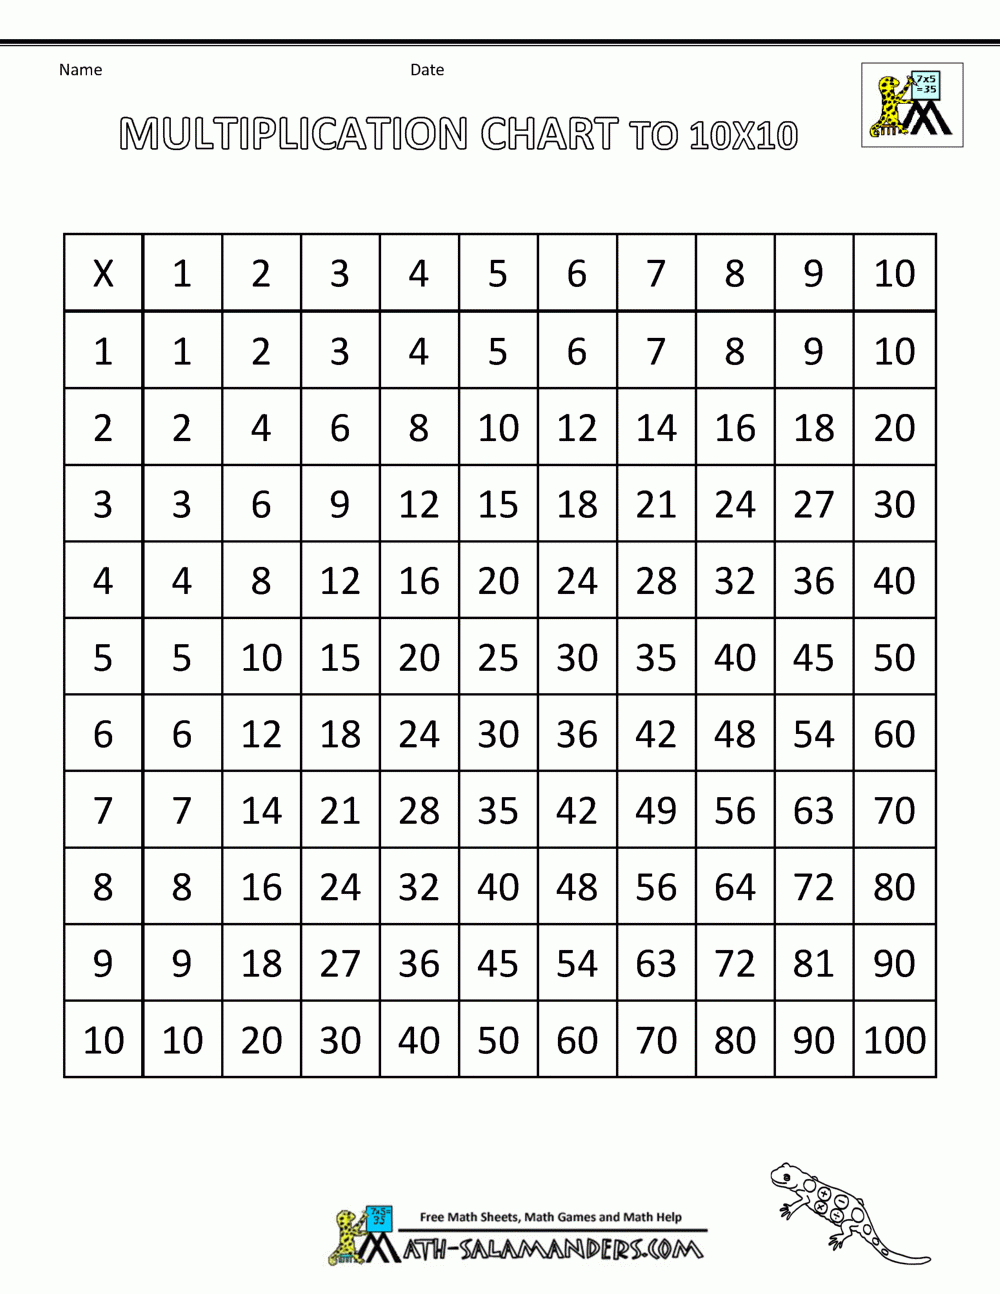 Multiplication Times Table Chart with Printable Pdf Multiplication Table